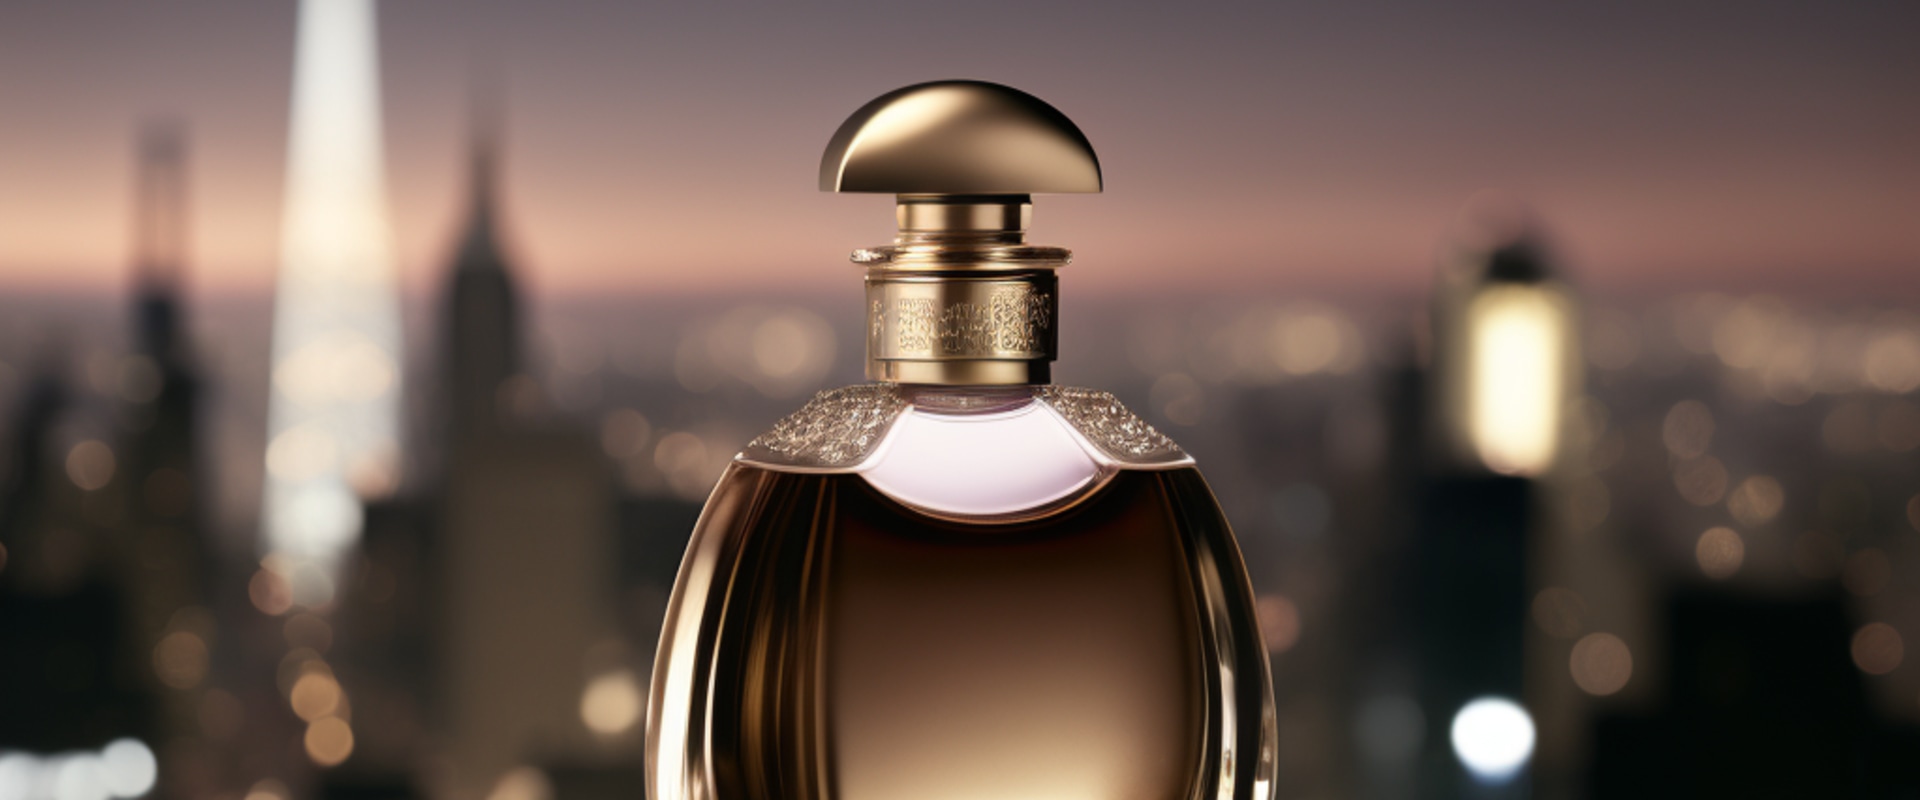 Nogara customized perfume releases new range for affordability